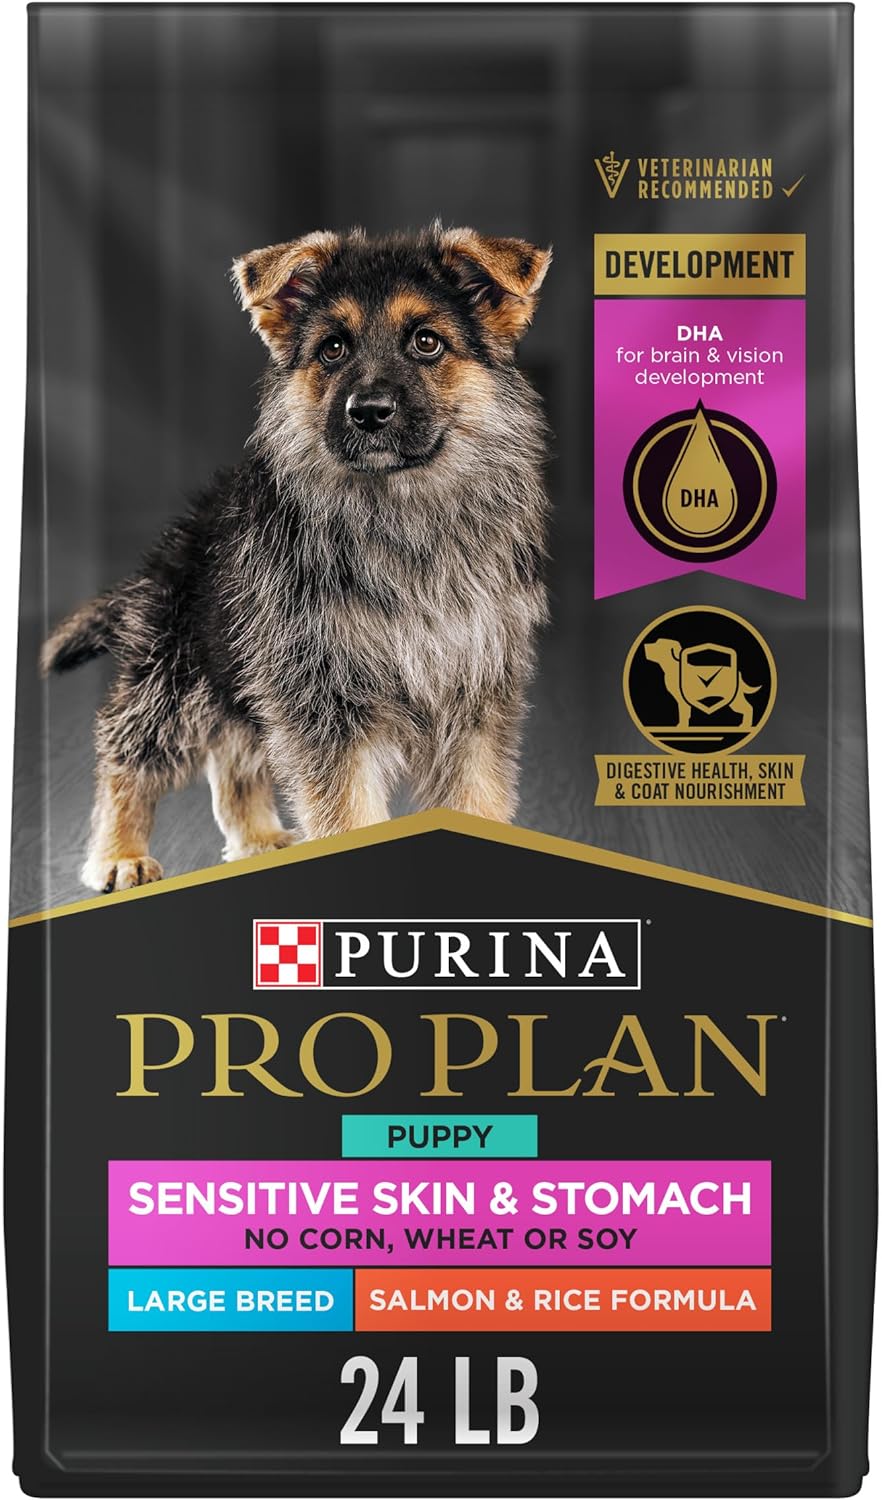 Purina Pro Plan Sensitive Skin and Stomach Large Breed Puppy Food Salmon and Rice Formula - 24 lb. Bag